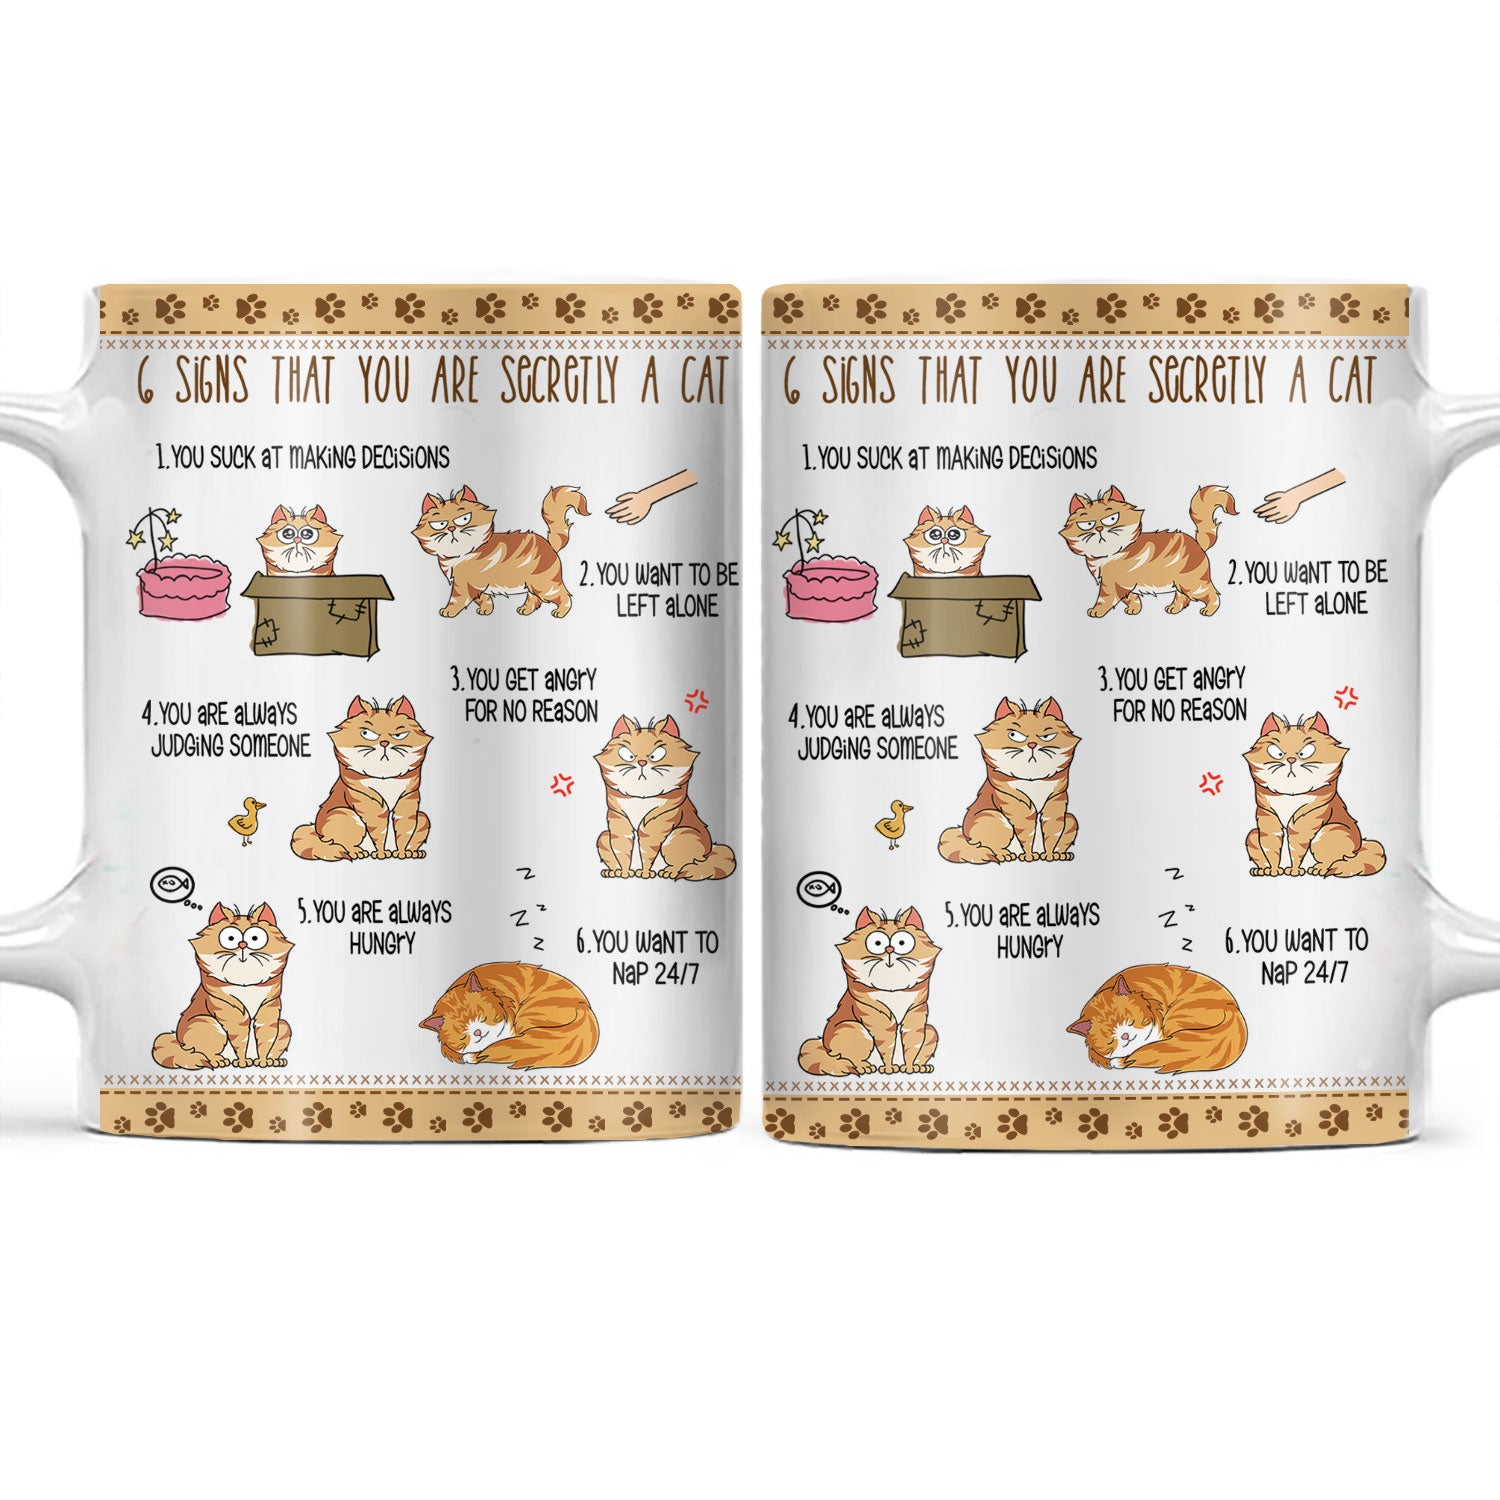 6 Signs That You Are Secretly A Cat - Funny Gift For Cat Lovers, Cat Mom, Cat Dad - Personalized White Edge-to-Edge Mug